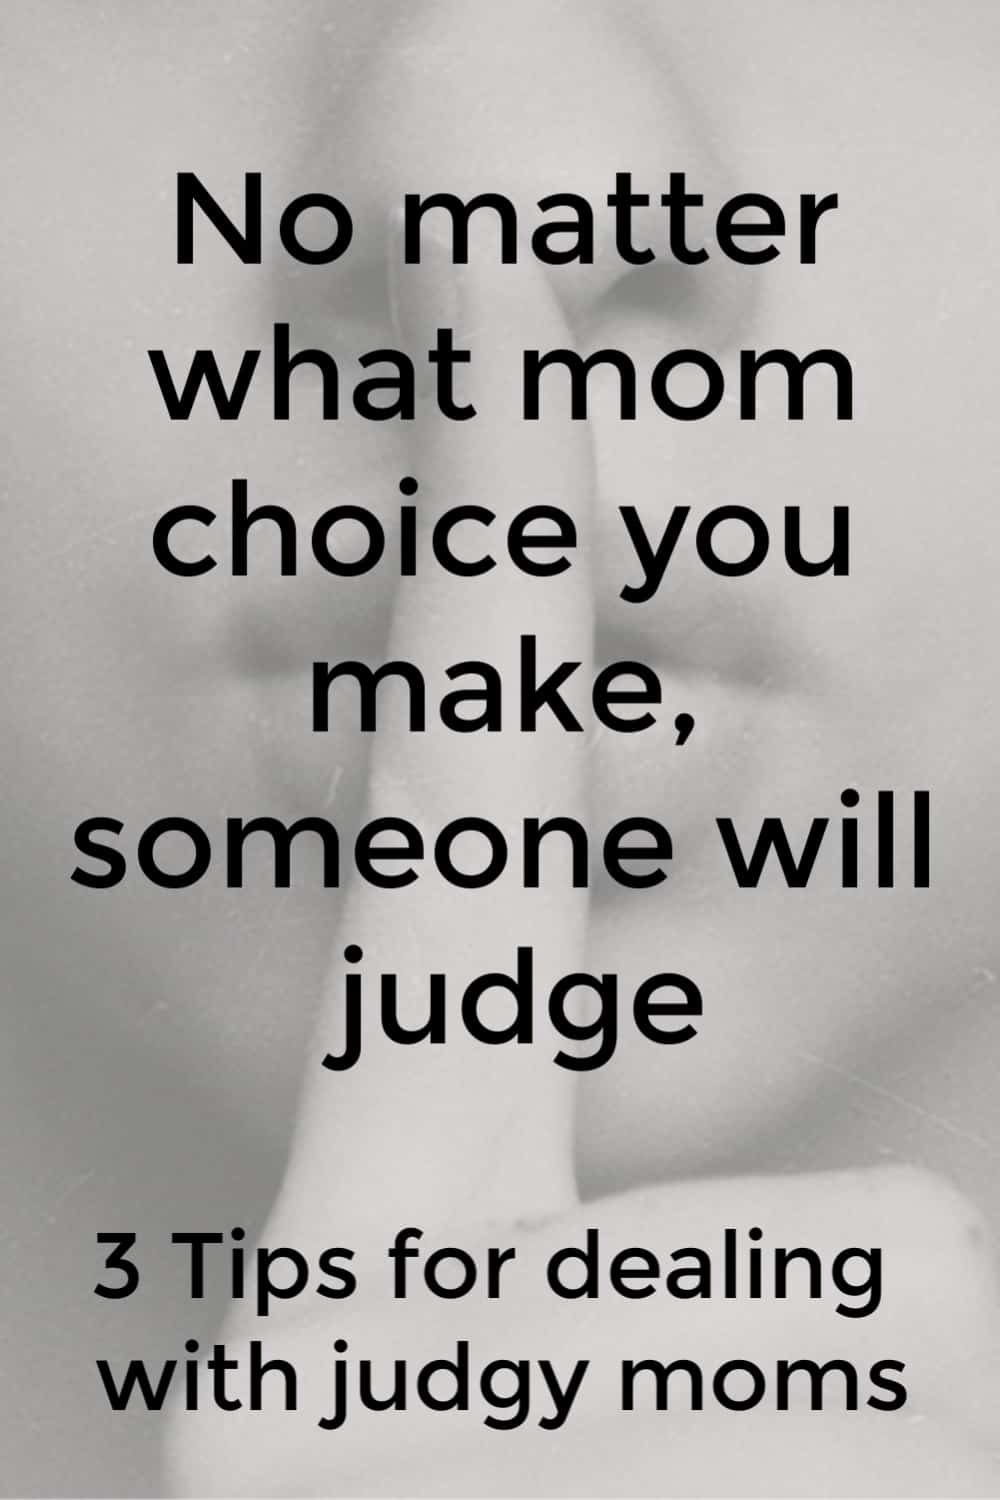 3 Tips for dealing with judging moms. Support for moms doesn't have to be hard to find with this comprehensive guide filled with parenting resources for moms you won't want to miss.